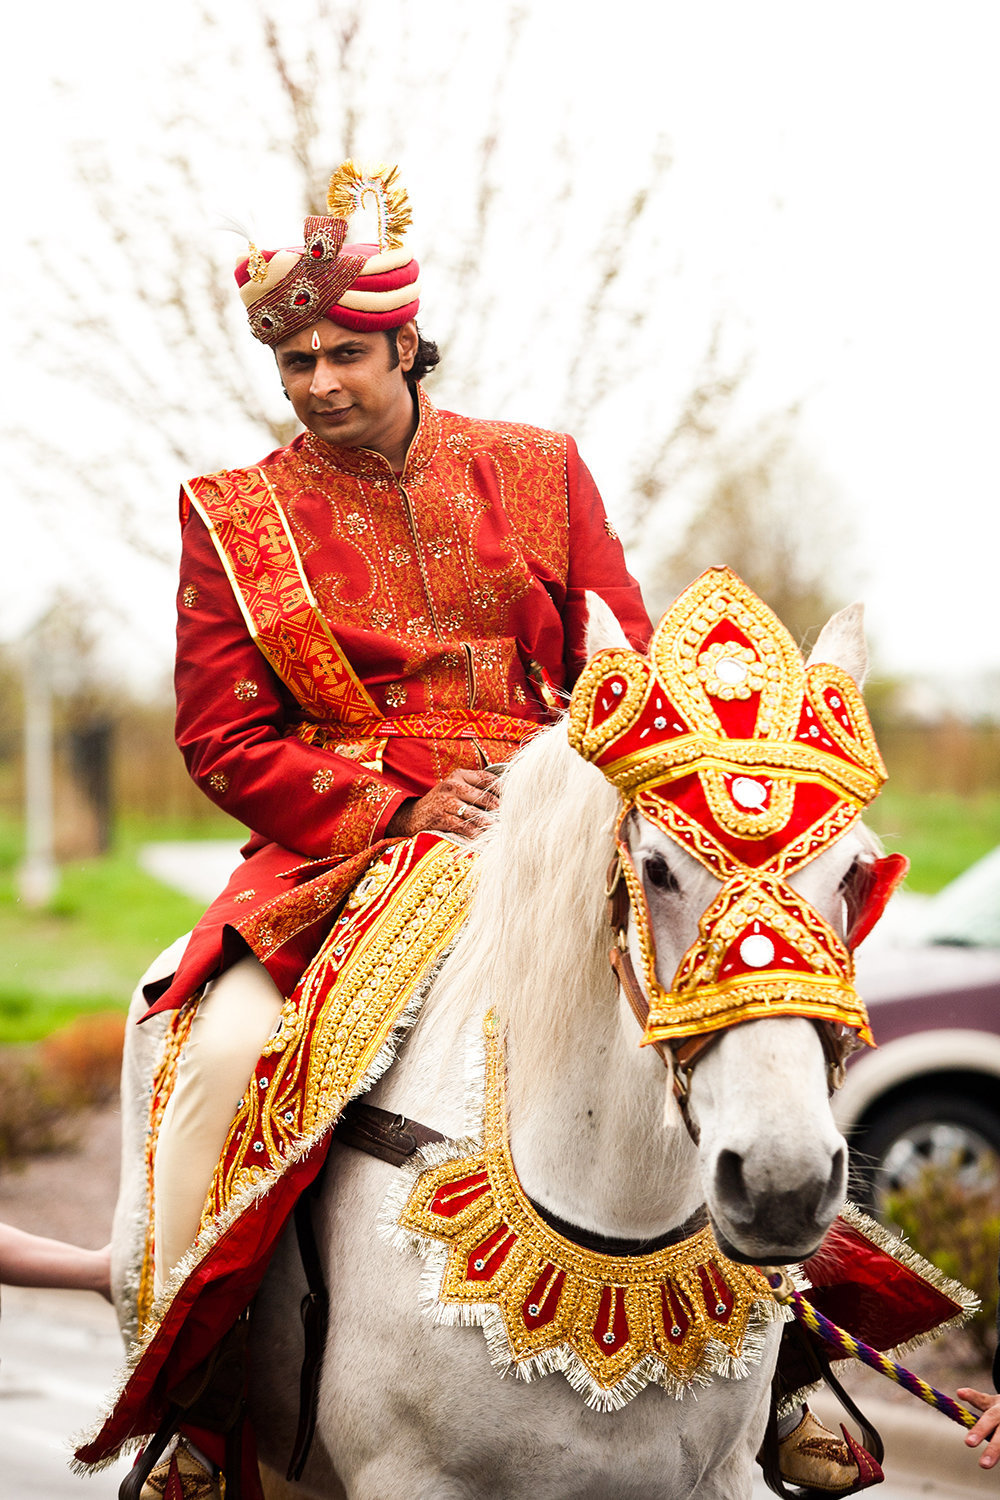 Traditional Hindu Baraat Ceremony with Groom on Horse